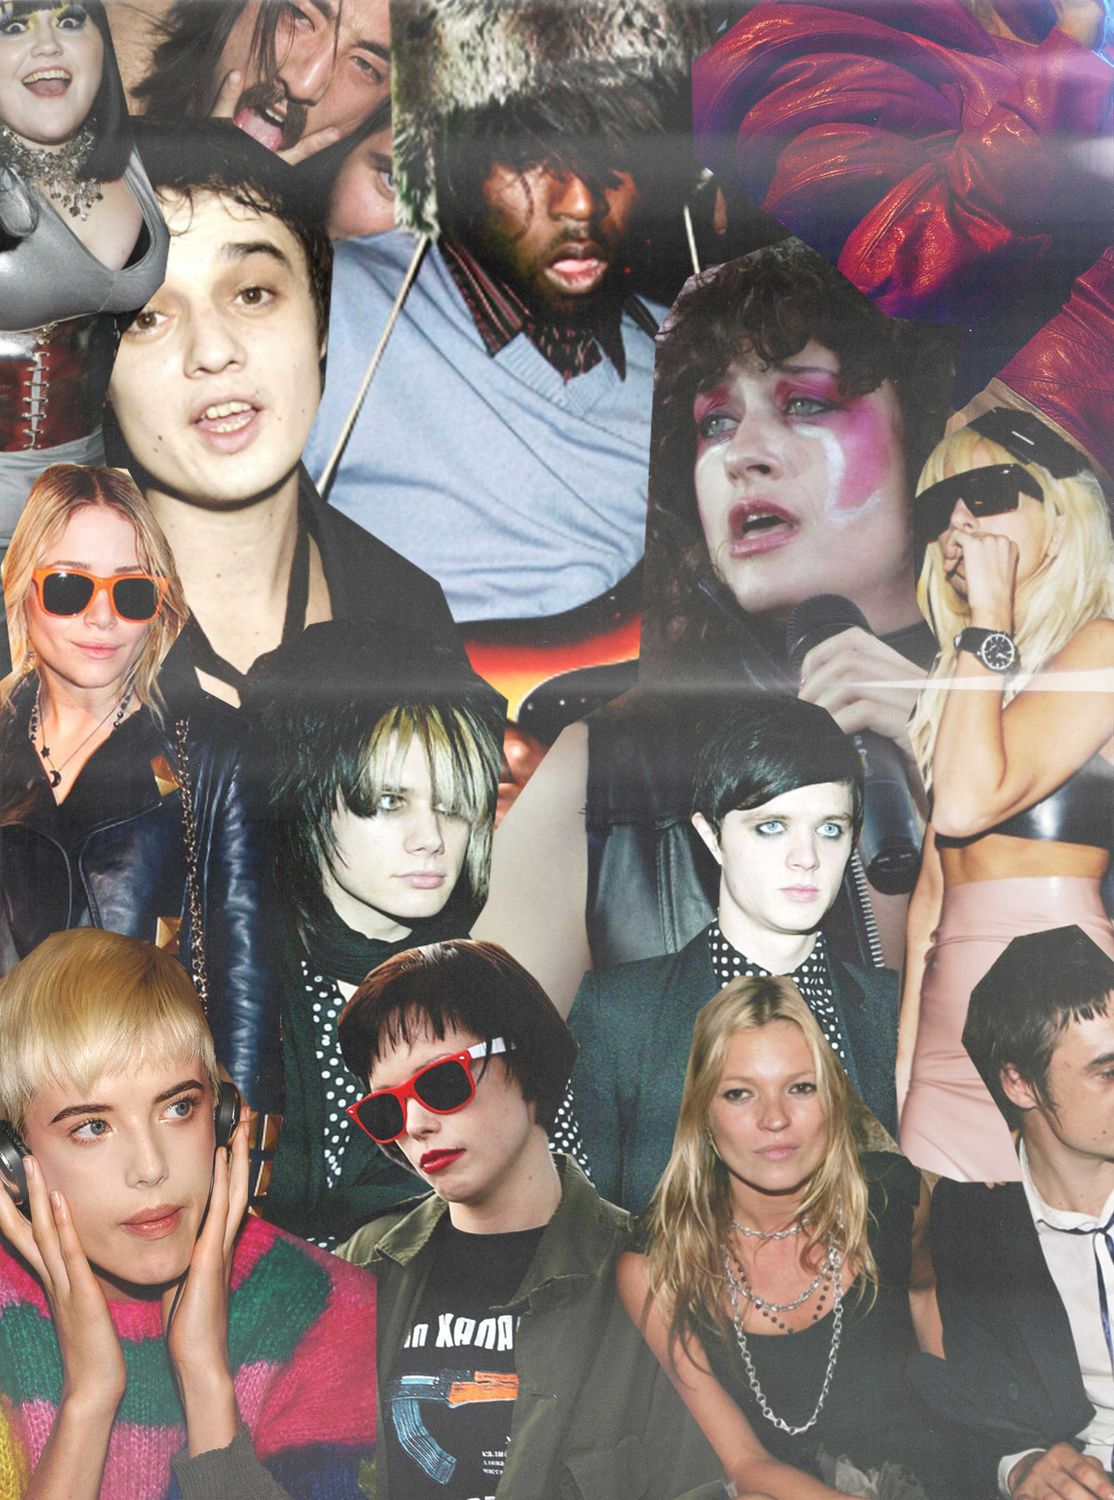 Are Indie Sleaze, Twee, and Tumblr Trends making a comeback? - GUAP